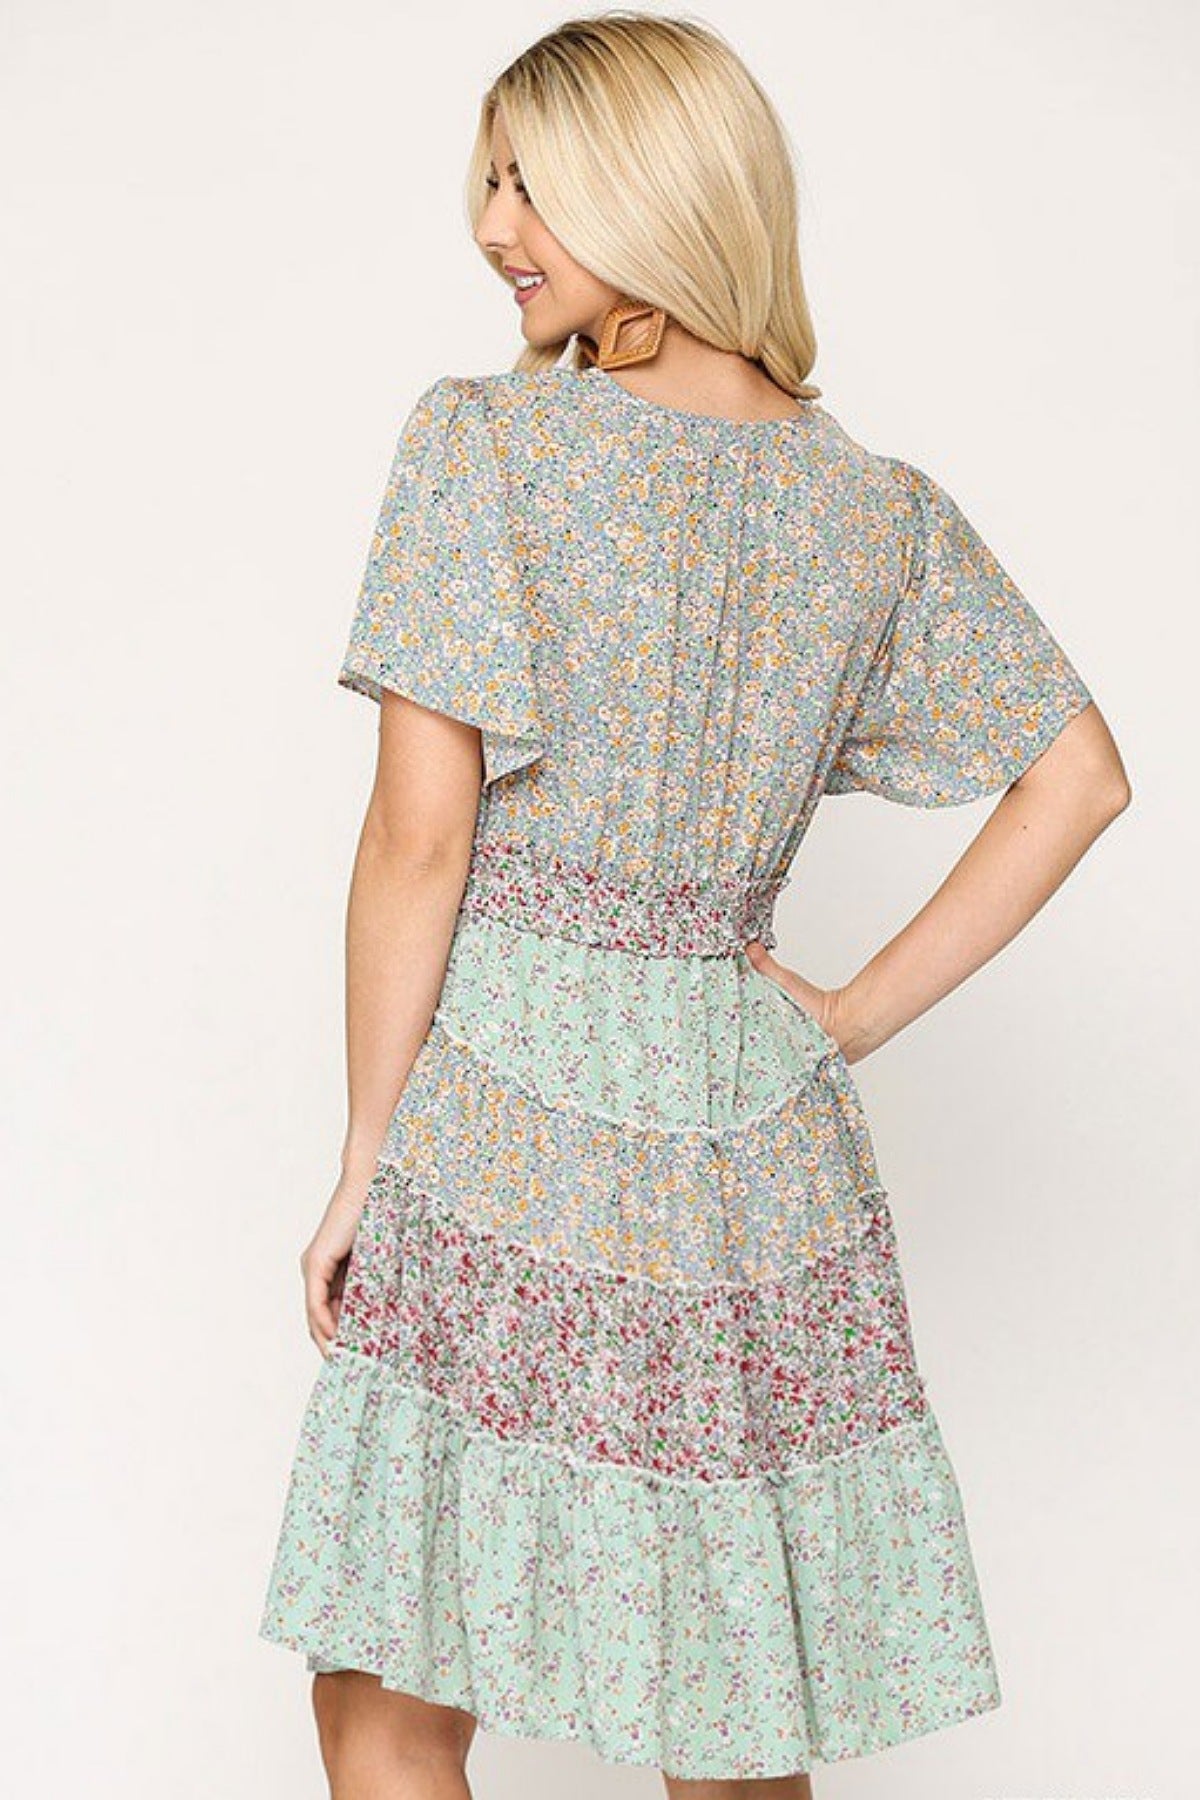 Oasis Ditsy Floral Dress - Petite